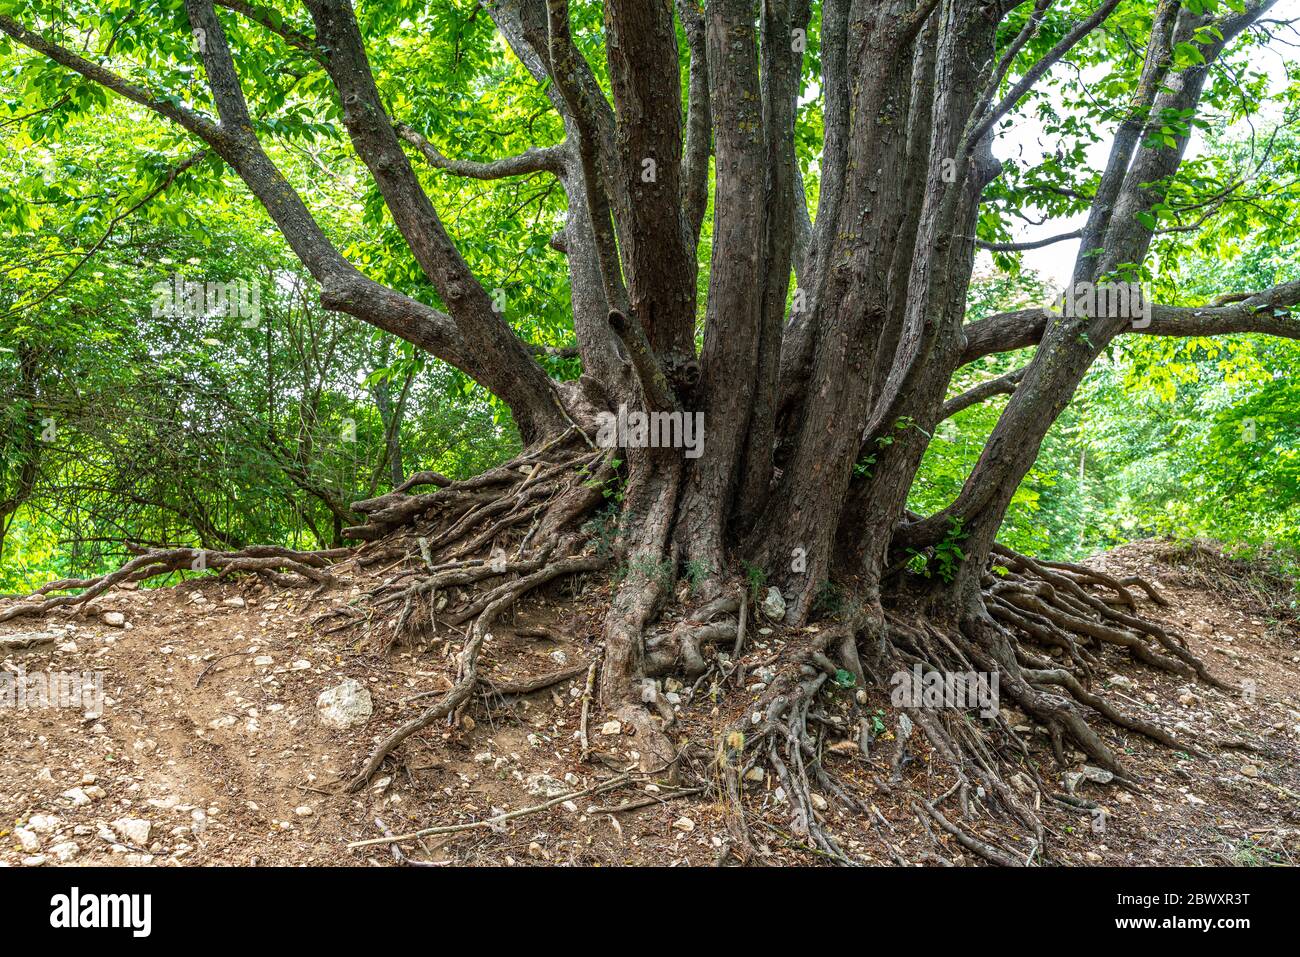 tree of many trunks with external roots Stock Photo